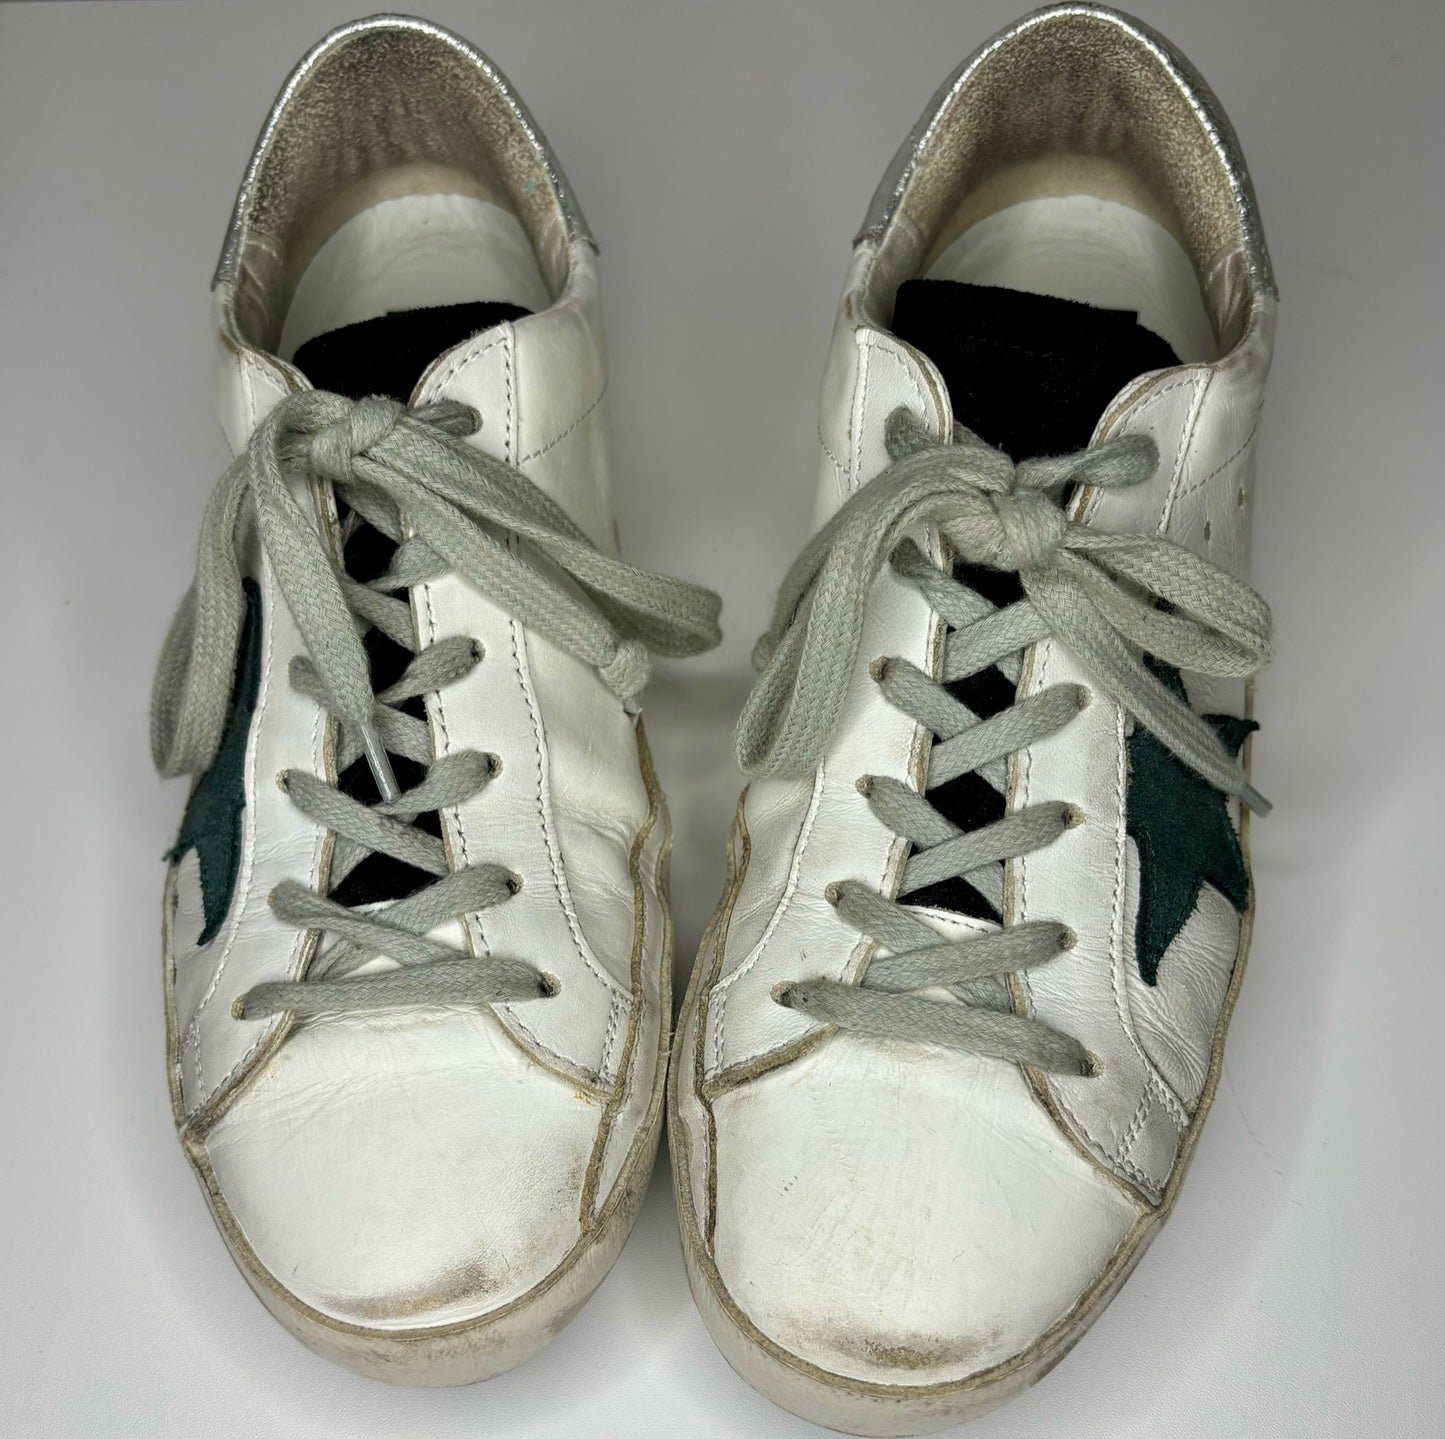 Golden Goose Leather Cowhide Tennis shoes